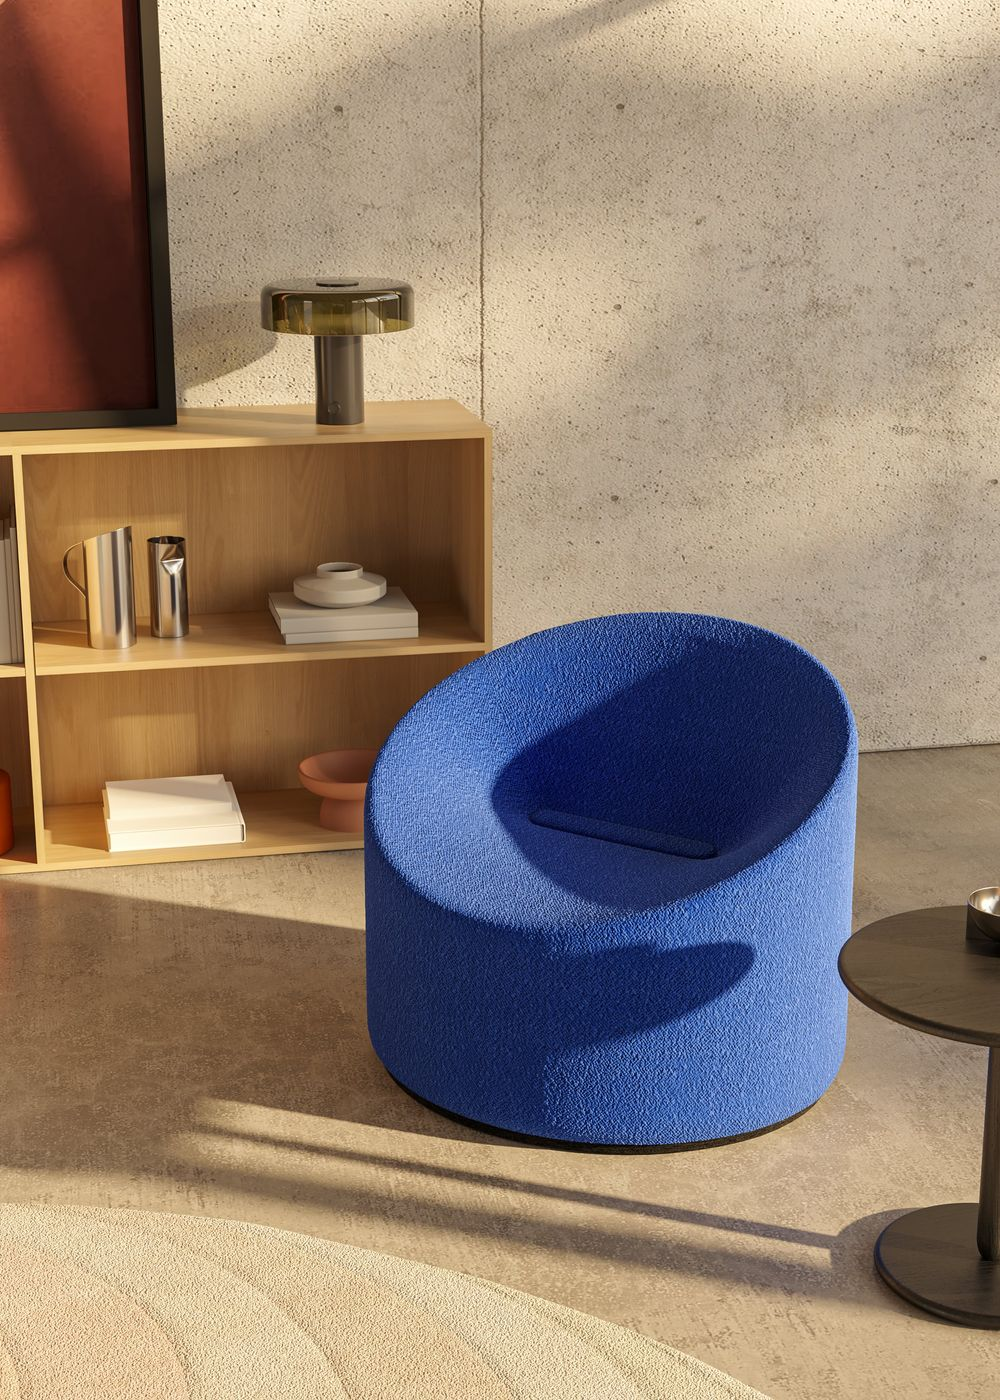 Bolet armchair by MUT Design. Images courtesy of Omelette Editions